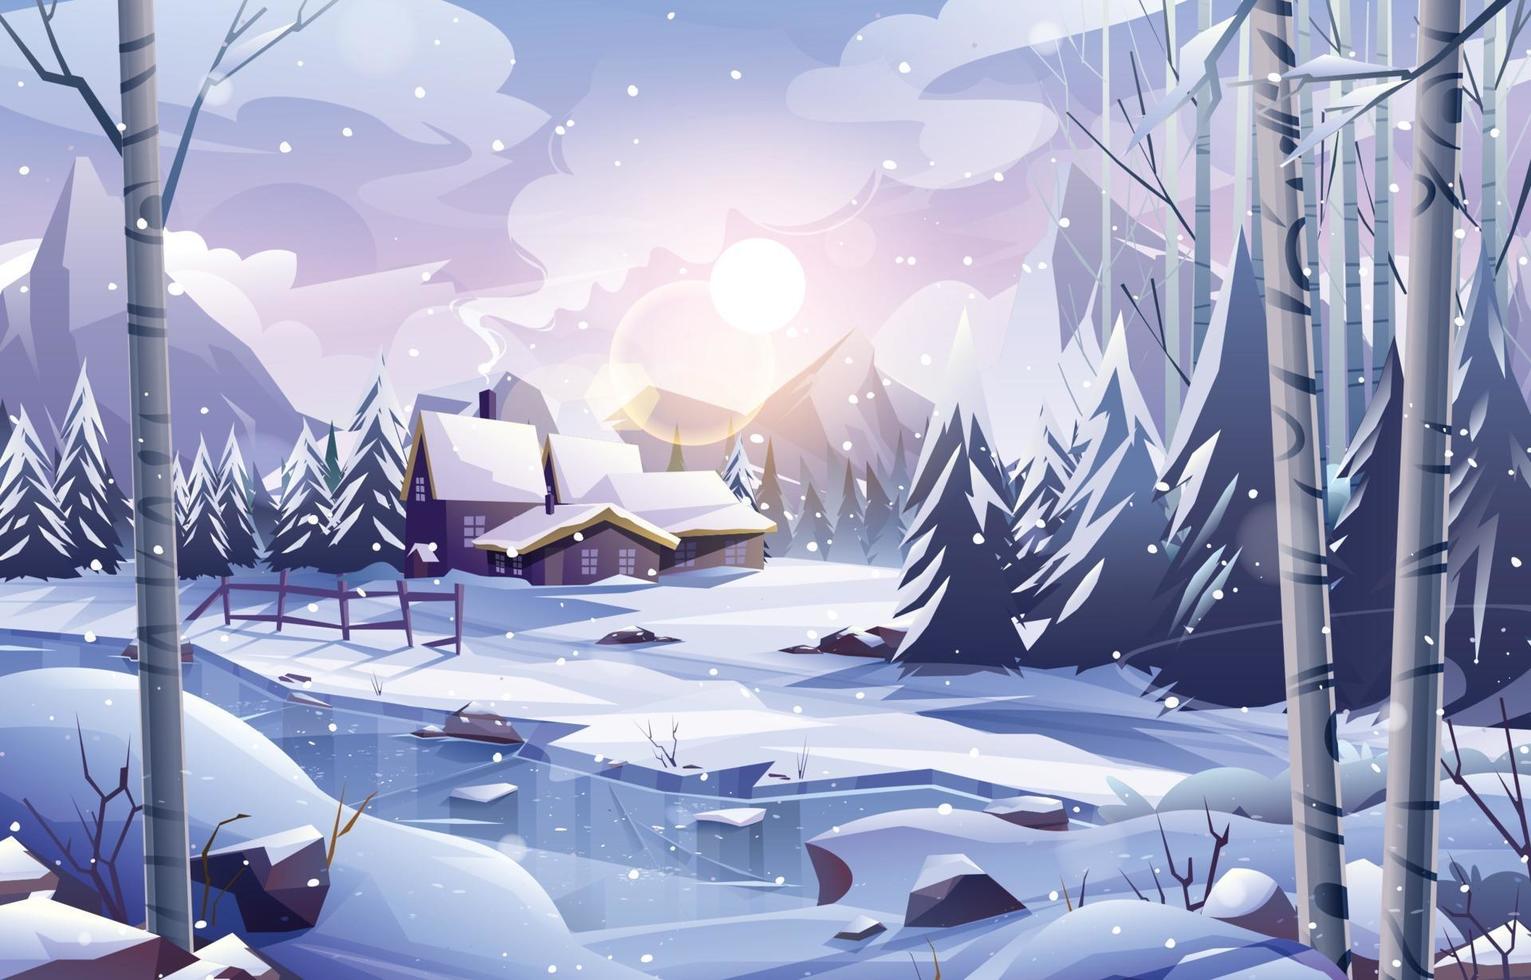 Village by The Frozen River in Winter Scenery vector